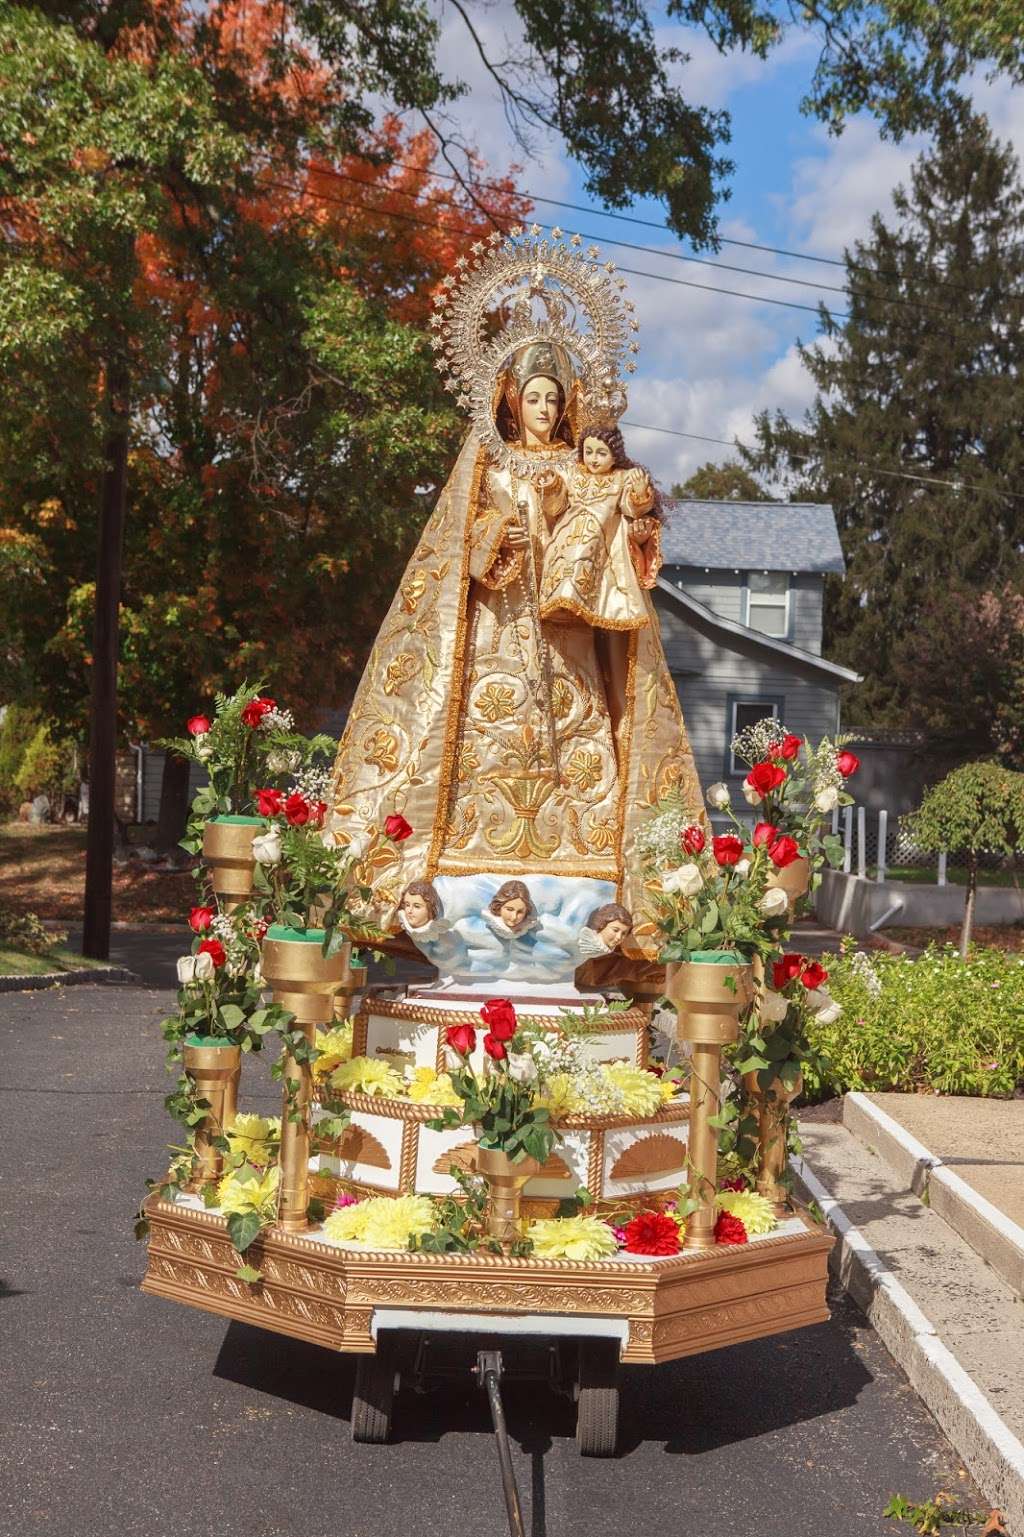 Our Lady of Fatima Youth Group - church  | Photo 7 of 10 | Address: 501 New Market Rd, Piscataway Township, NJ 08854, USA | Phone: (732) 968-5555